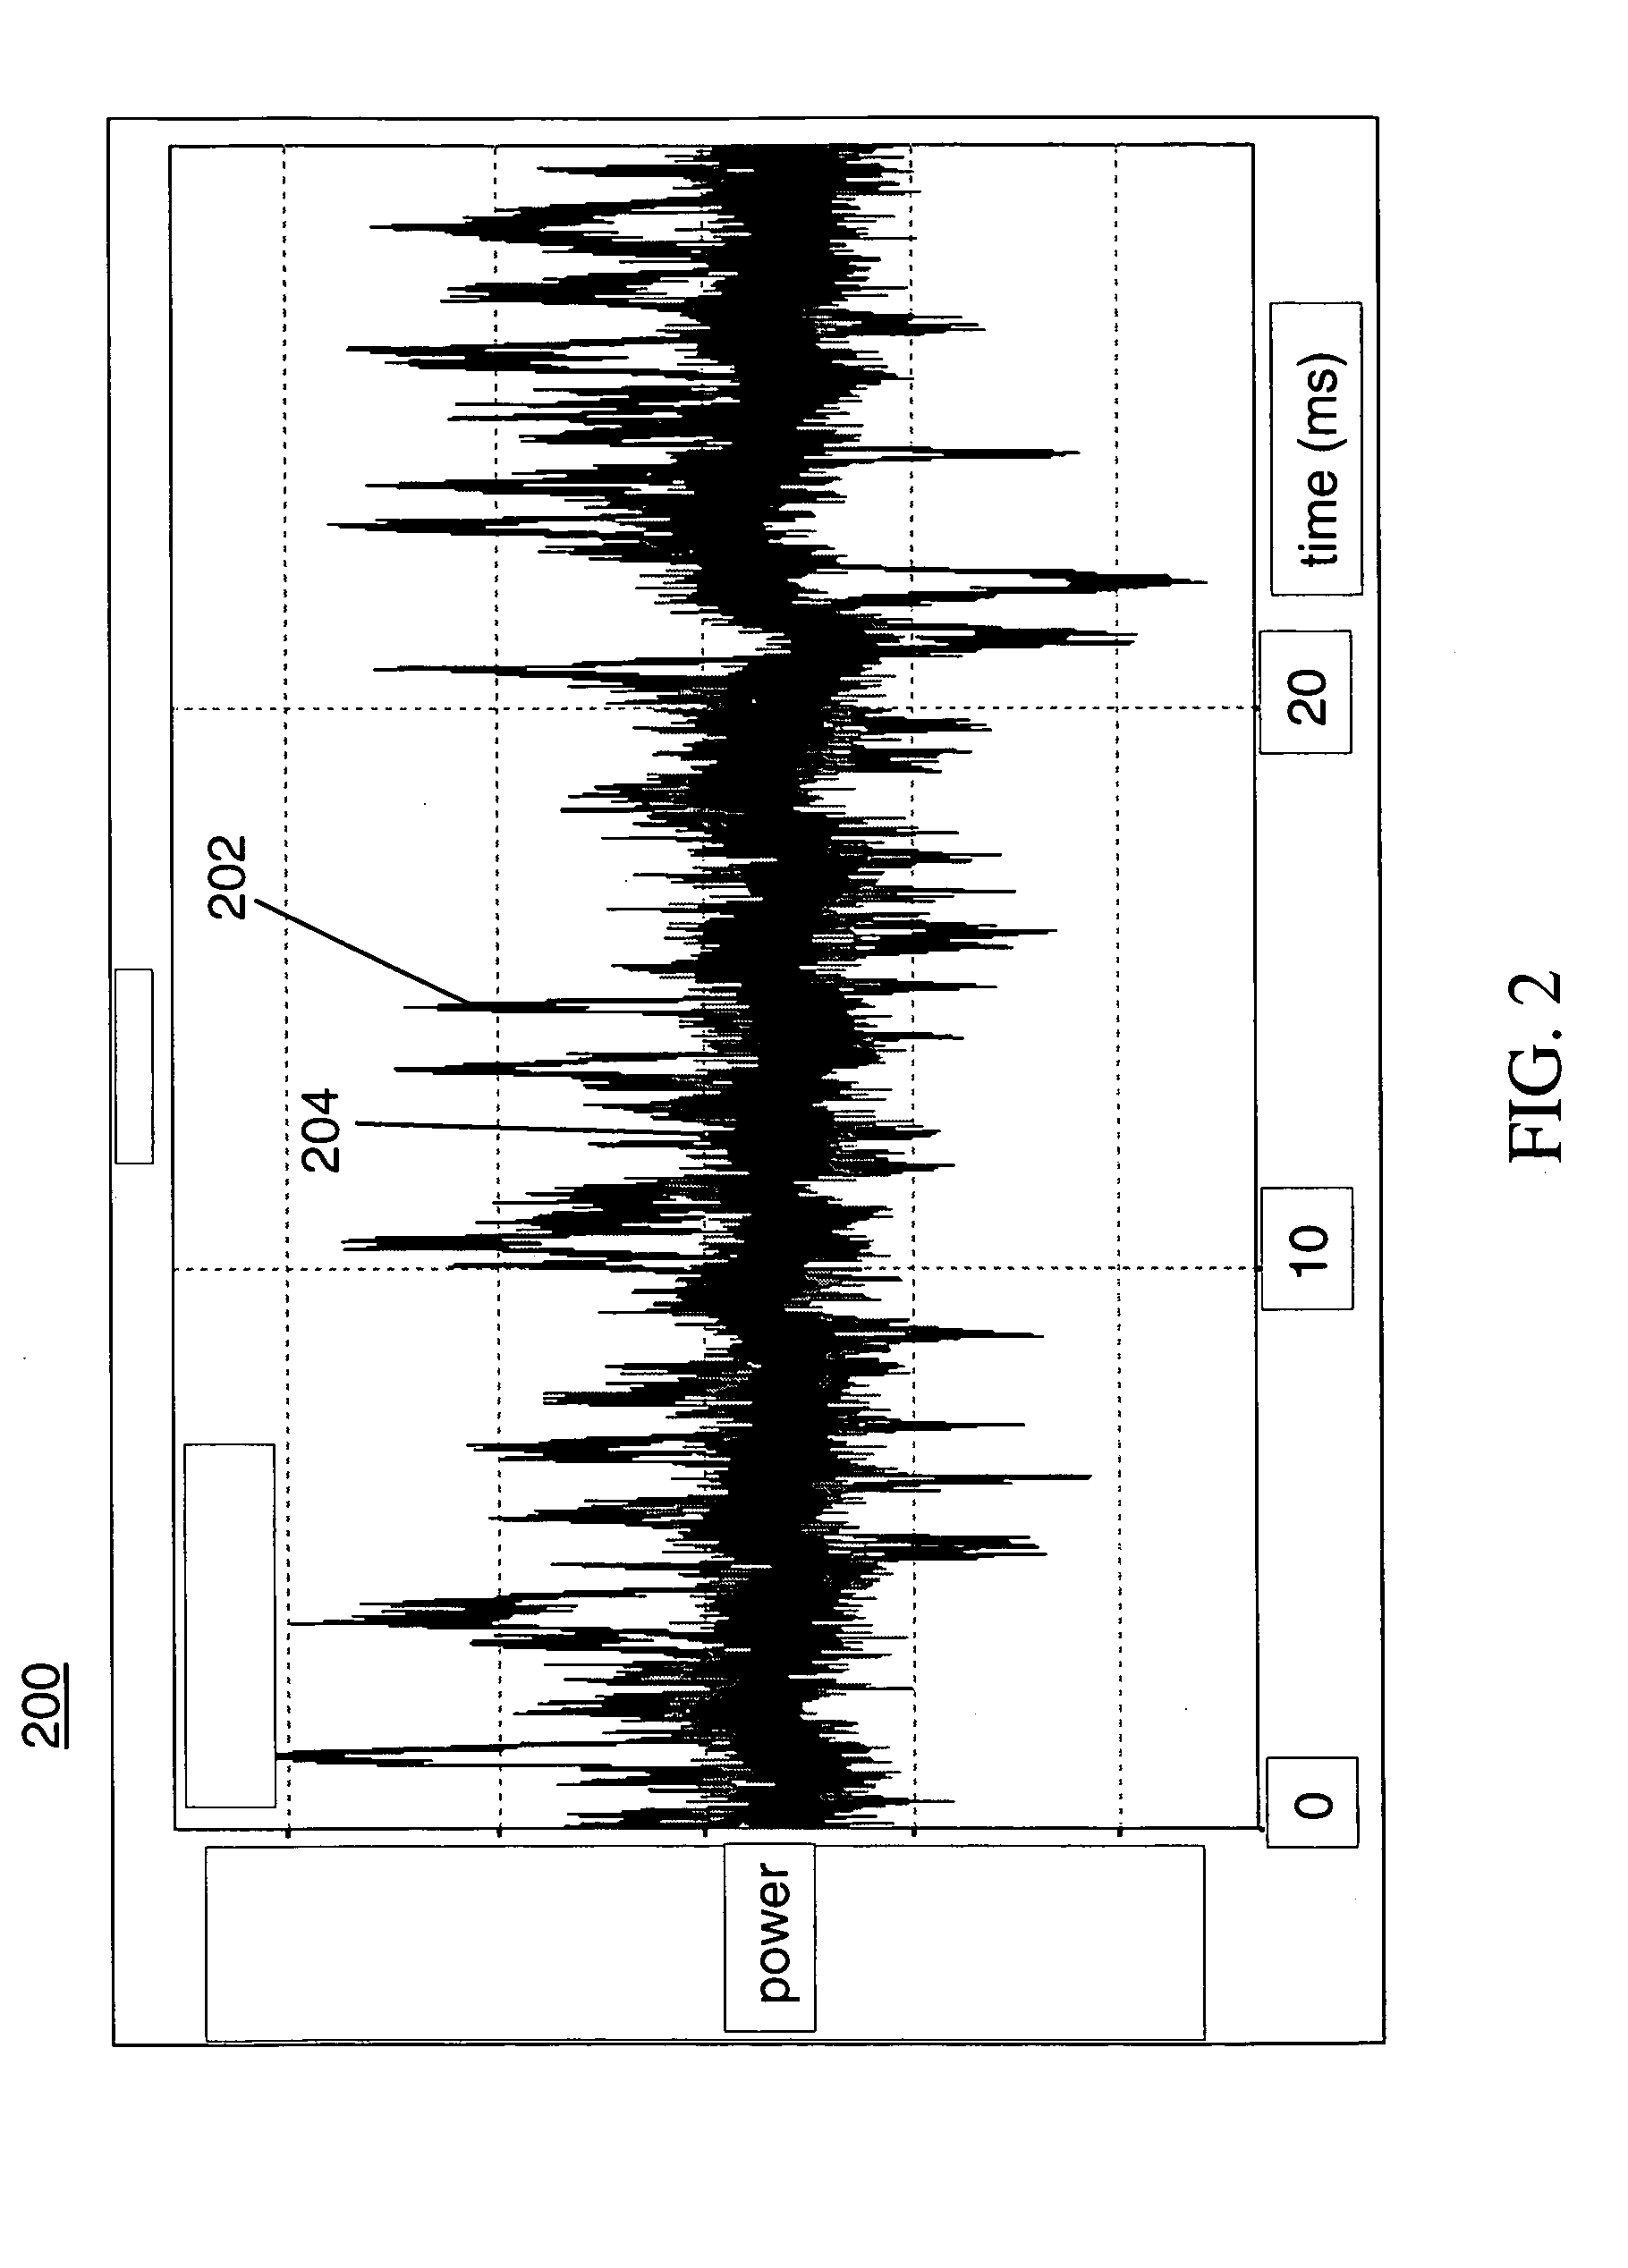 System and method for dynamic range extension and stable low power operation of optical amplifiers using pump laser pulse modulation